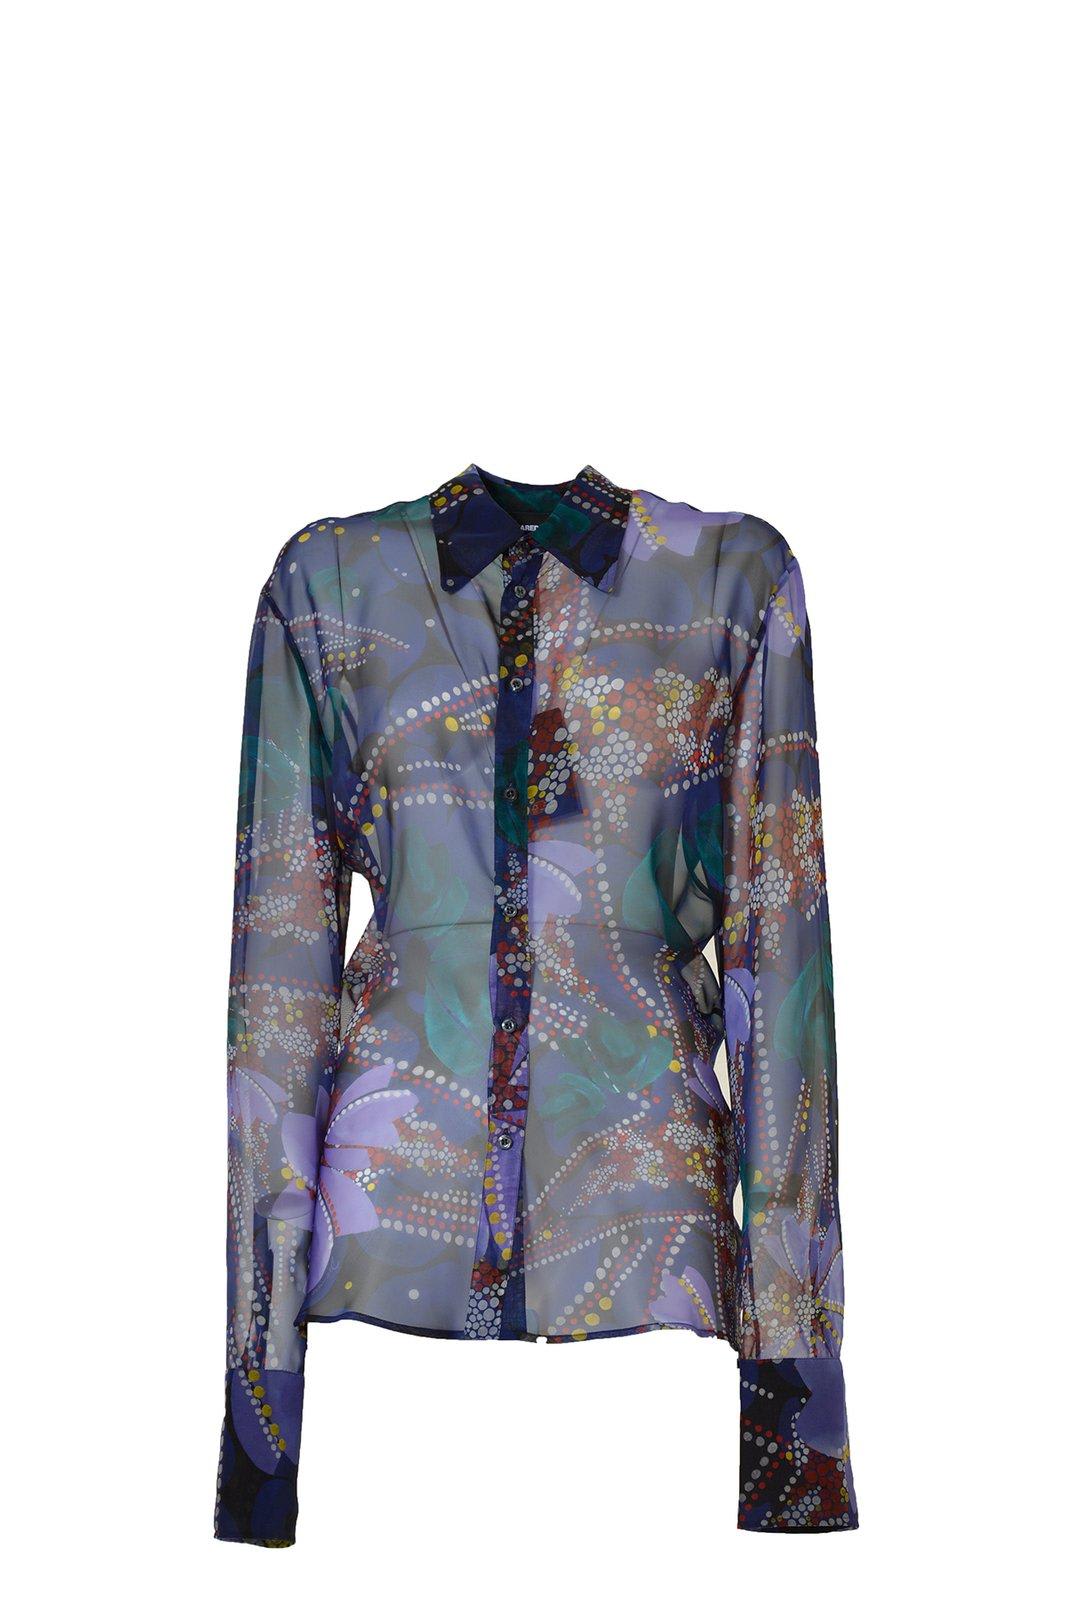 Dsquared2 Floral Printed Semi-sheer Buttoned Shirt